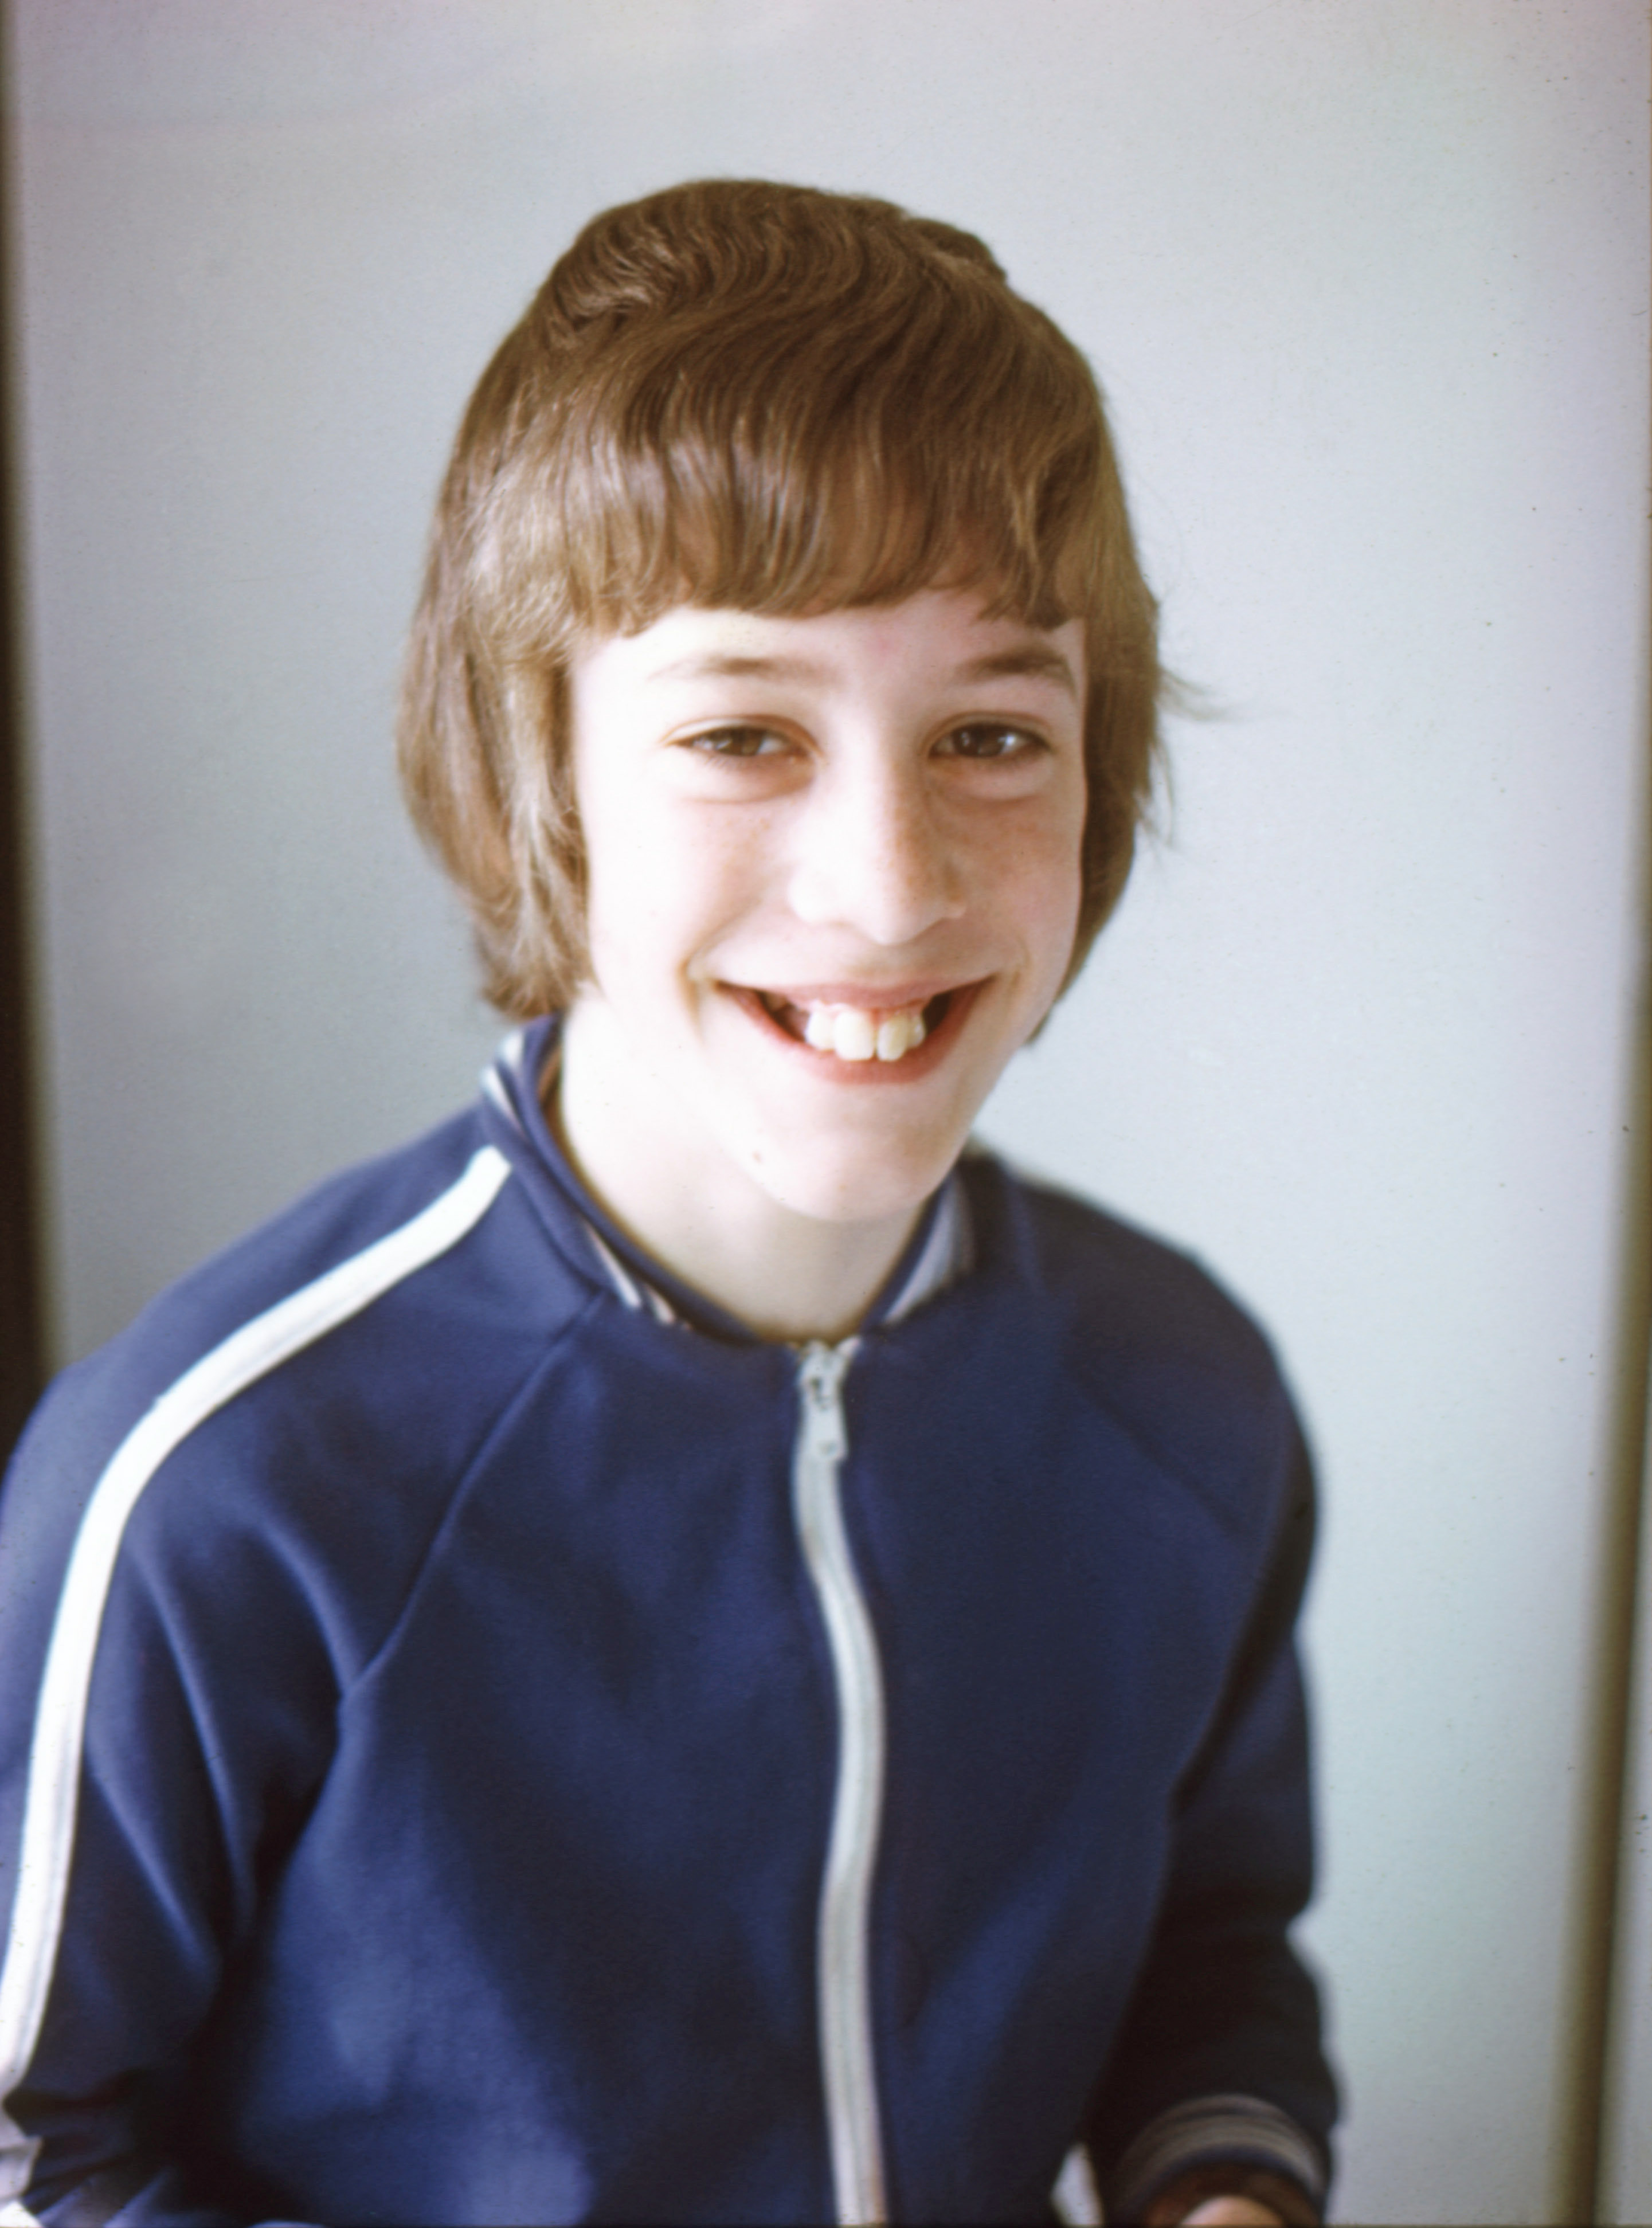 7706140 August 1977 - John has recently had his side teeth removed prior to orthodontic treatment.